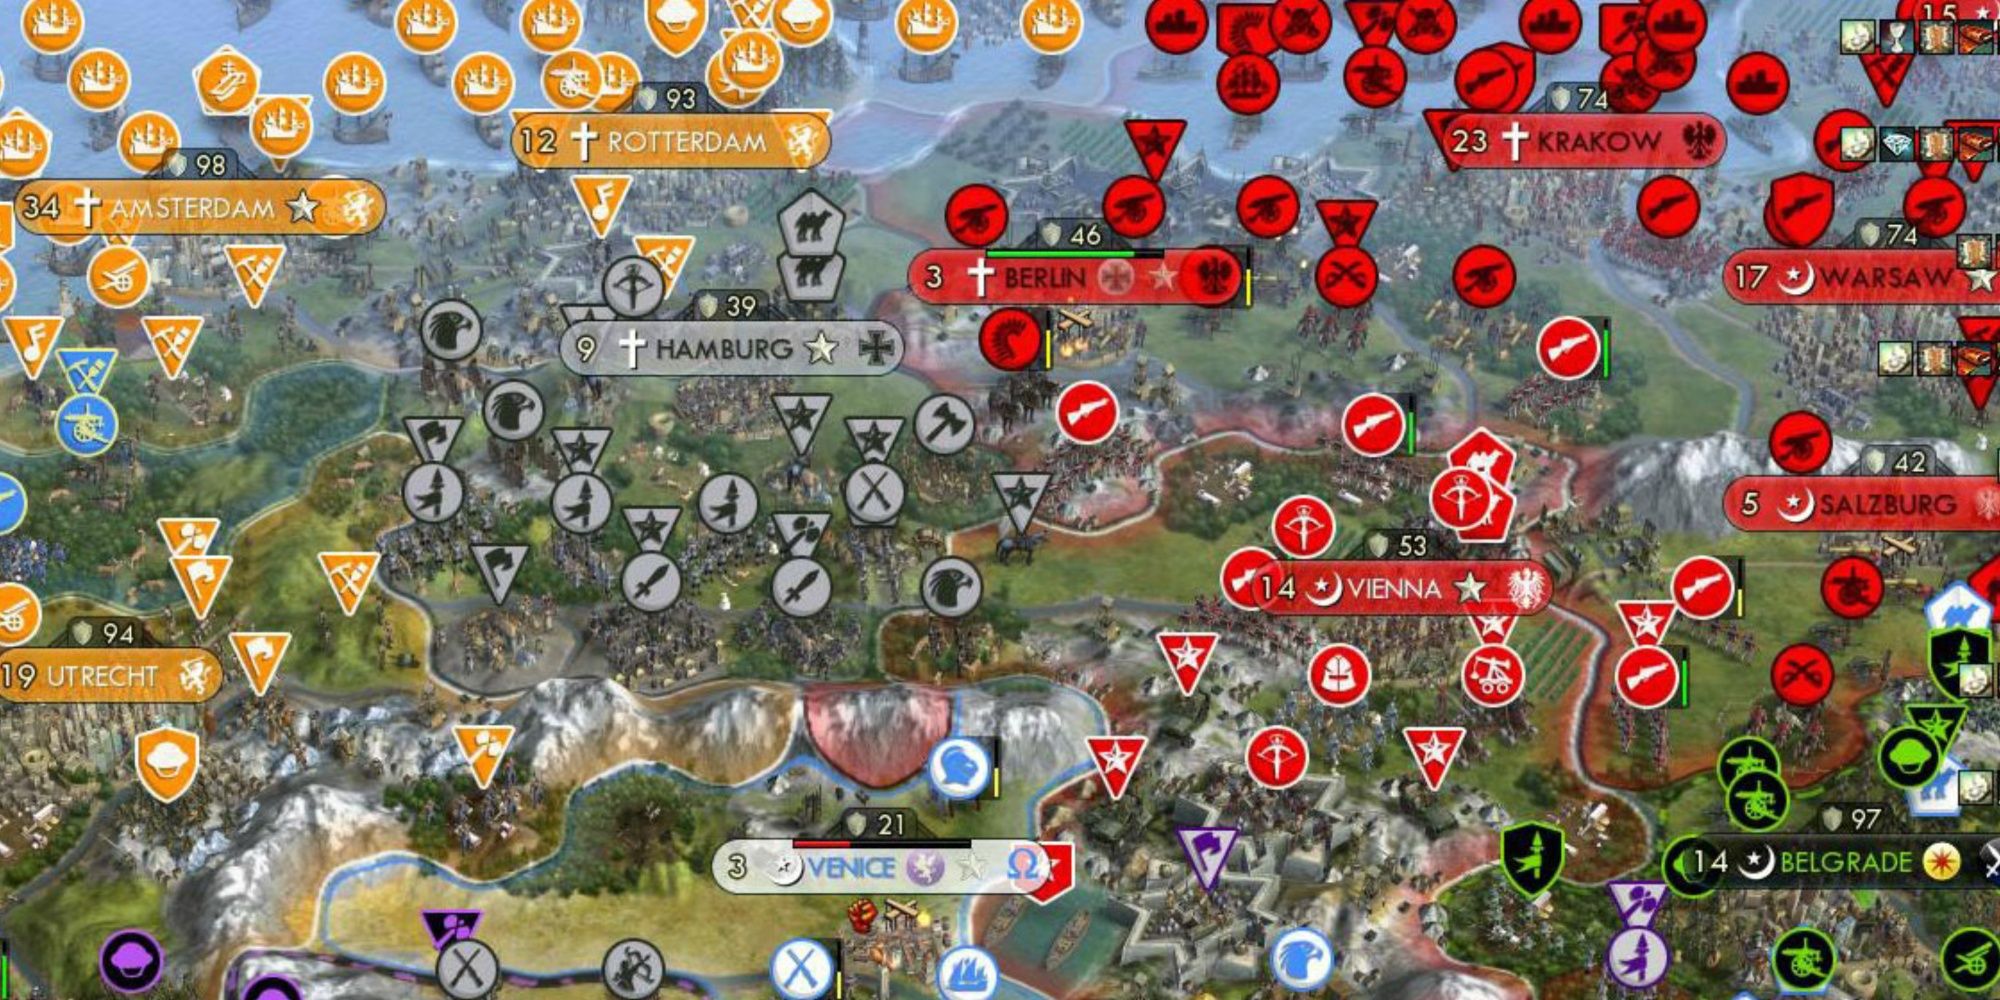 Large number of units in civ 5